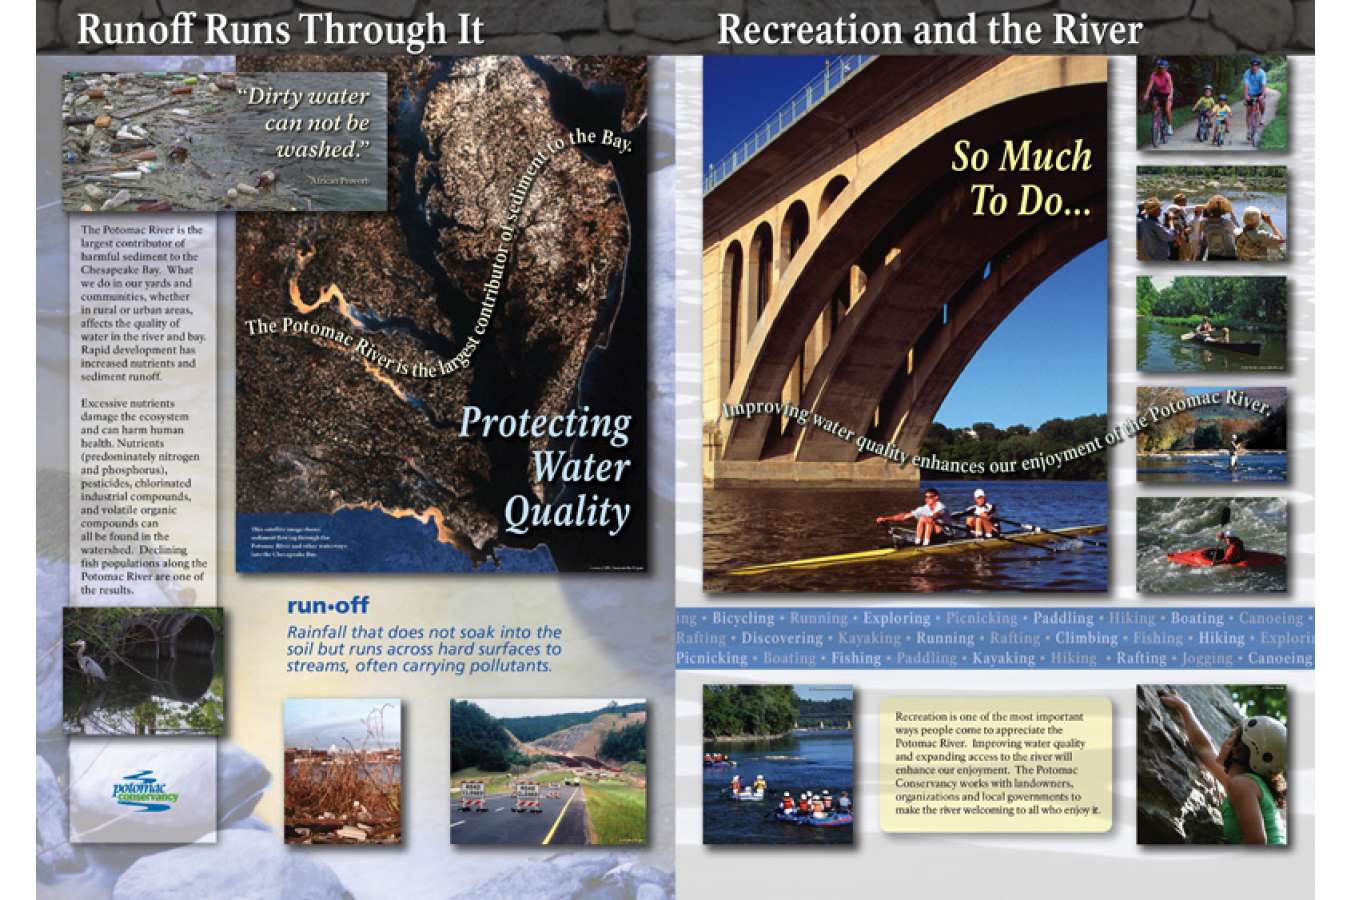 Potcy 4a&b : Runoff Runs Through it & Recreation and the River Displays at the River Center